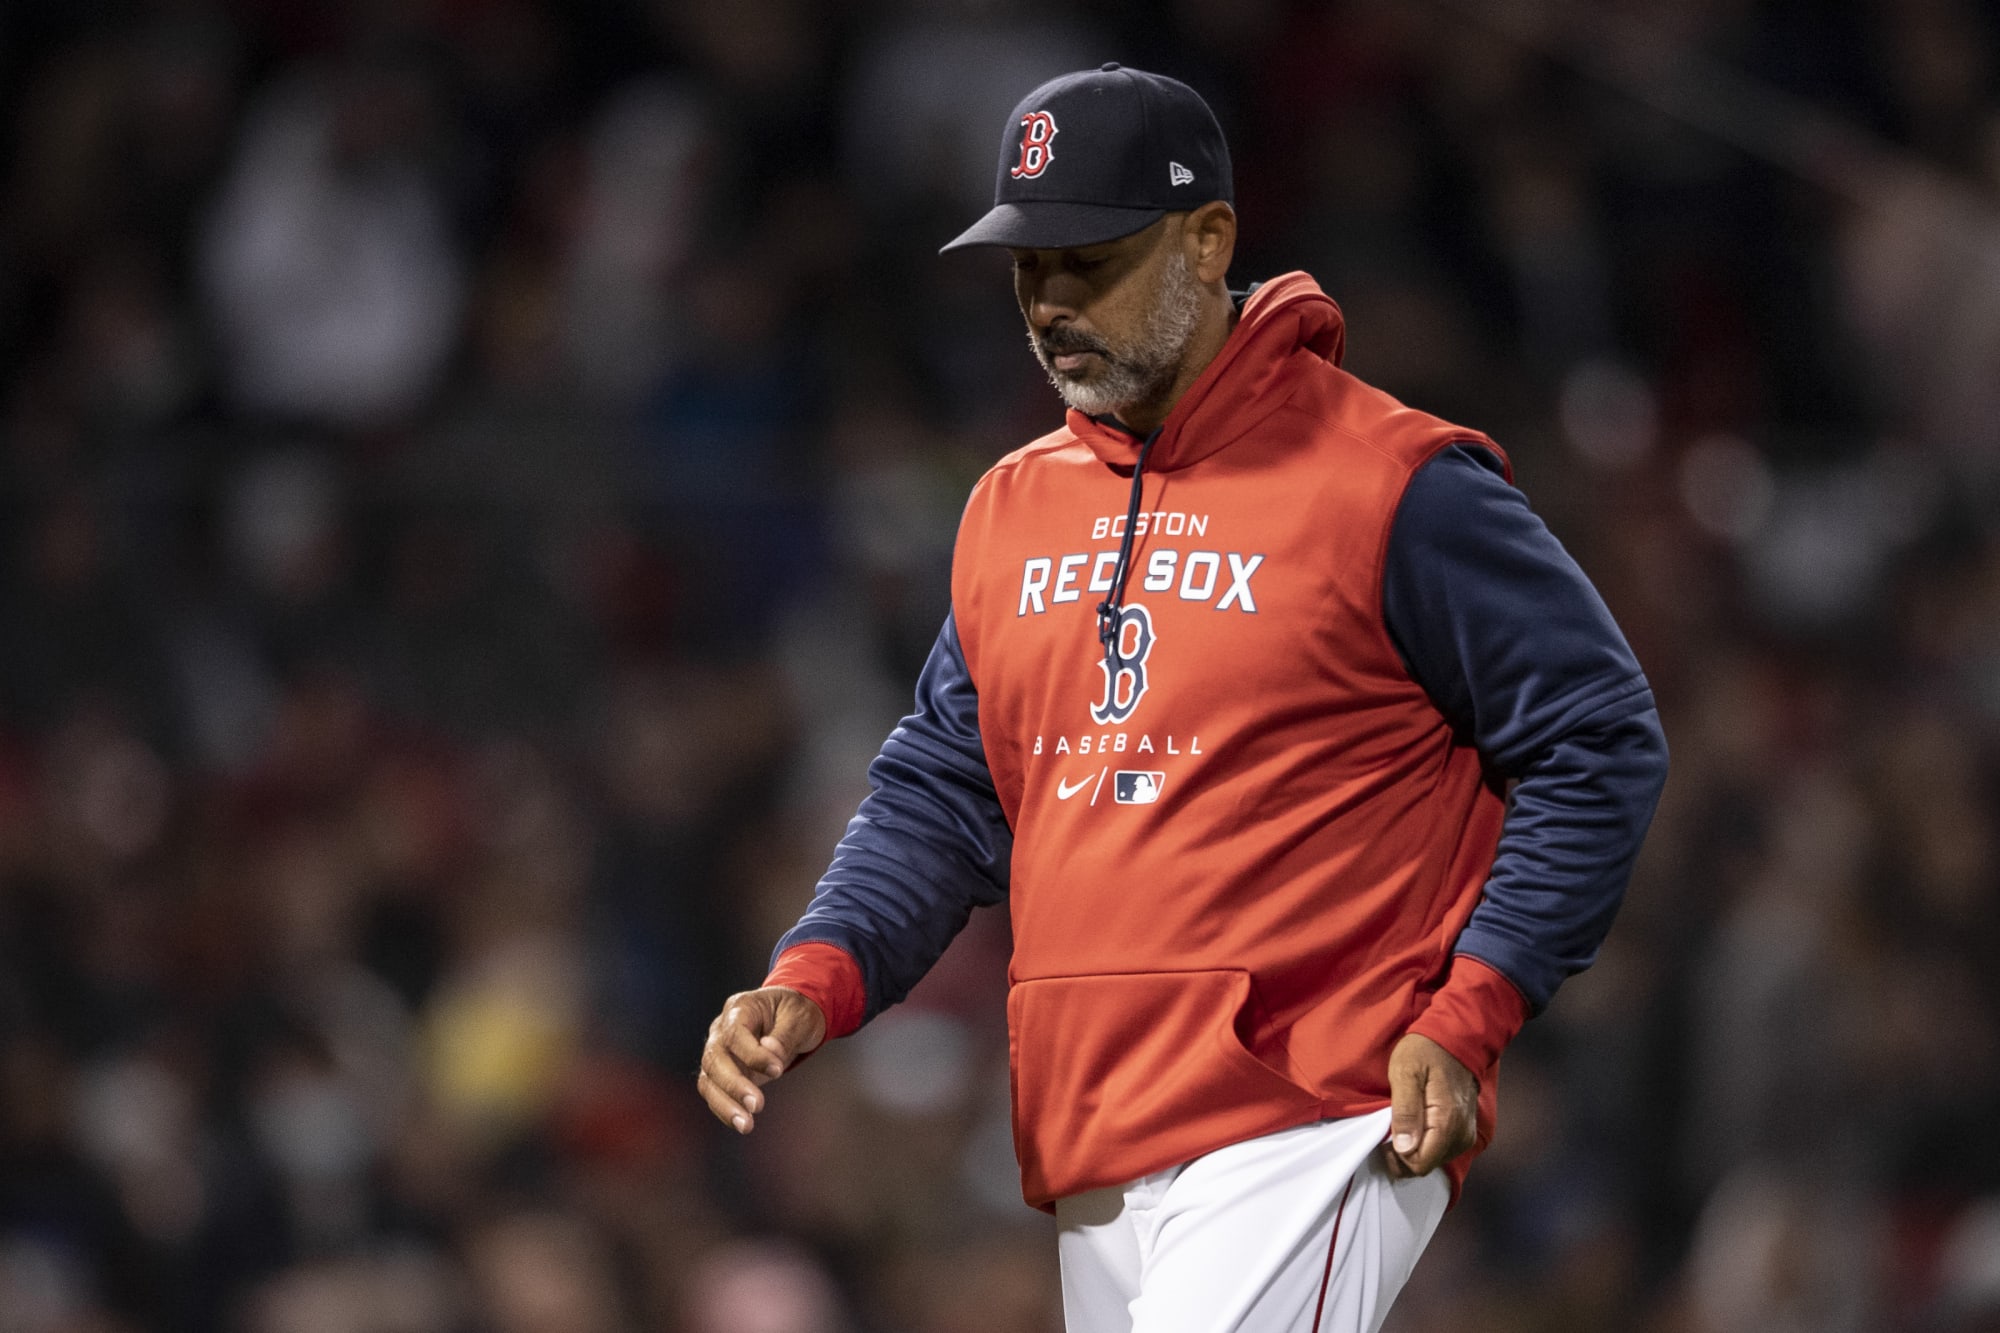 Alex Cora exposed in latest Astros sign-stealing report